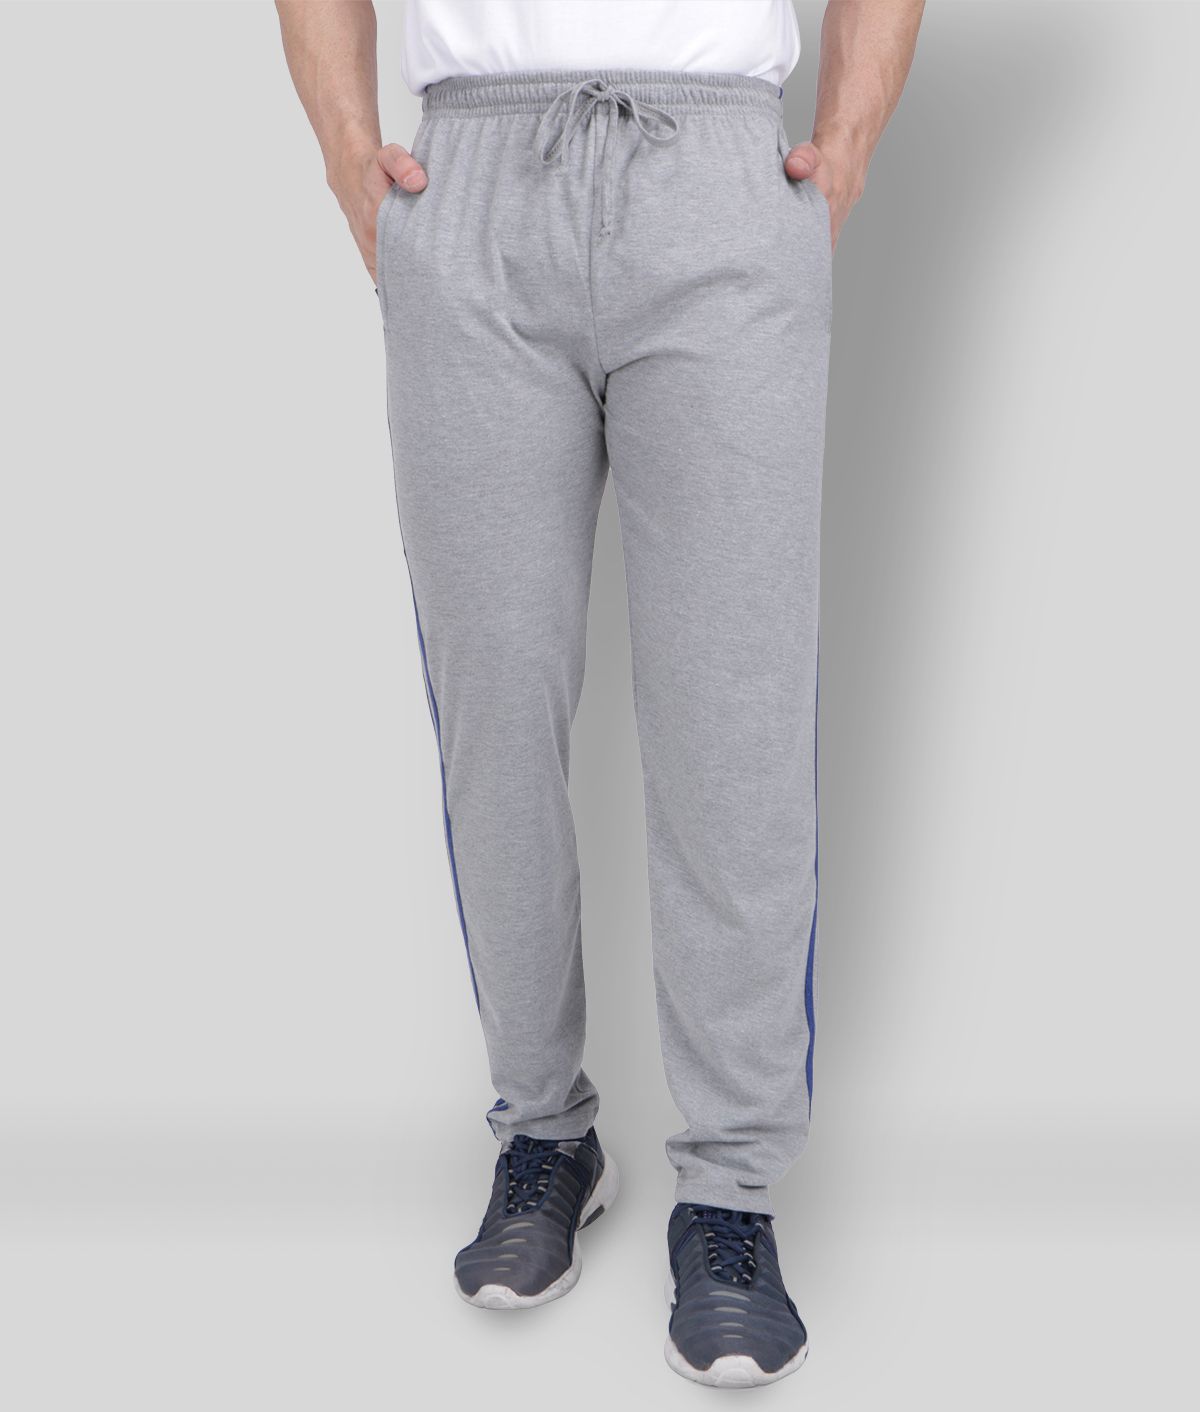     			Neo Garments - Light Grey Cotton Men's Trackpants ( Pack of 1 )